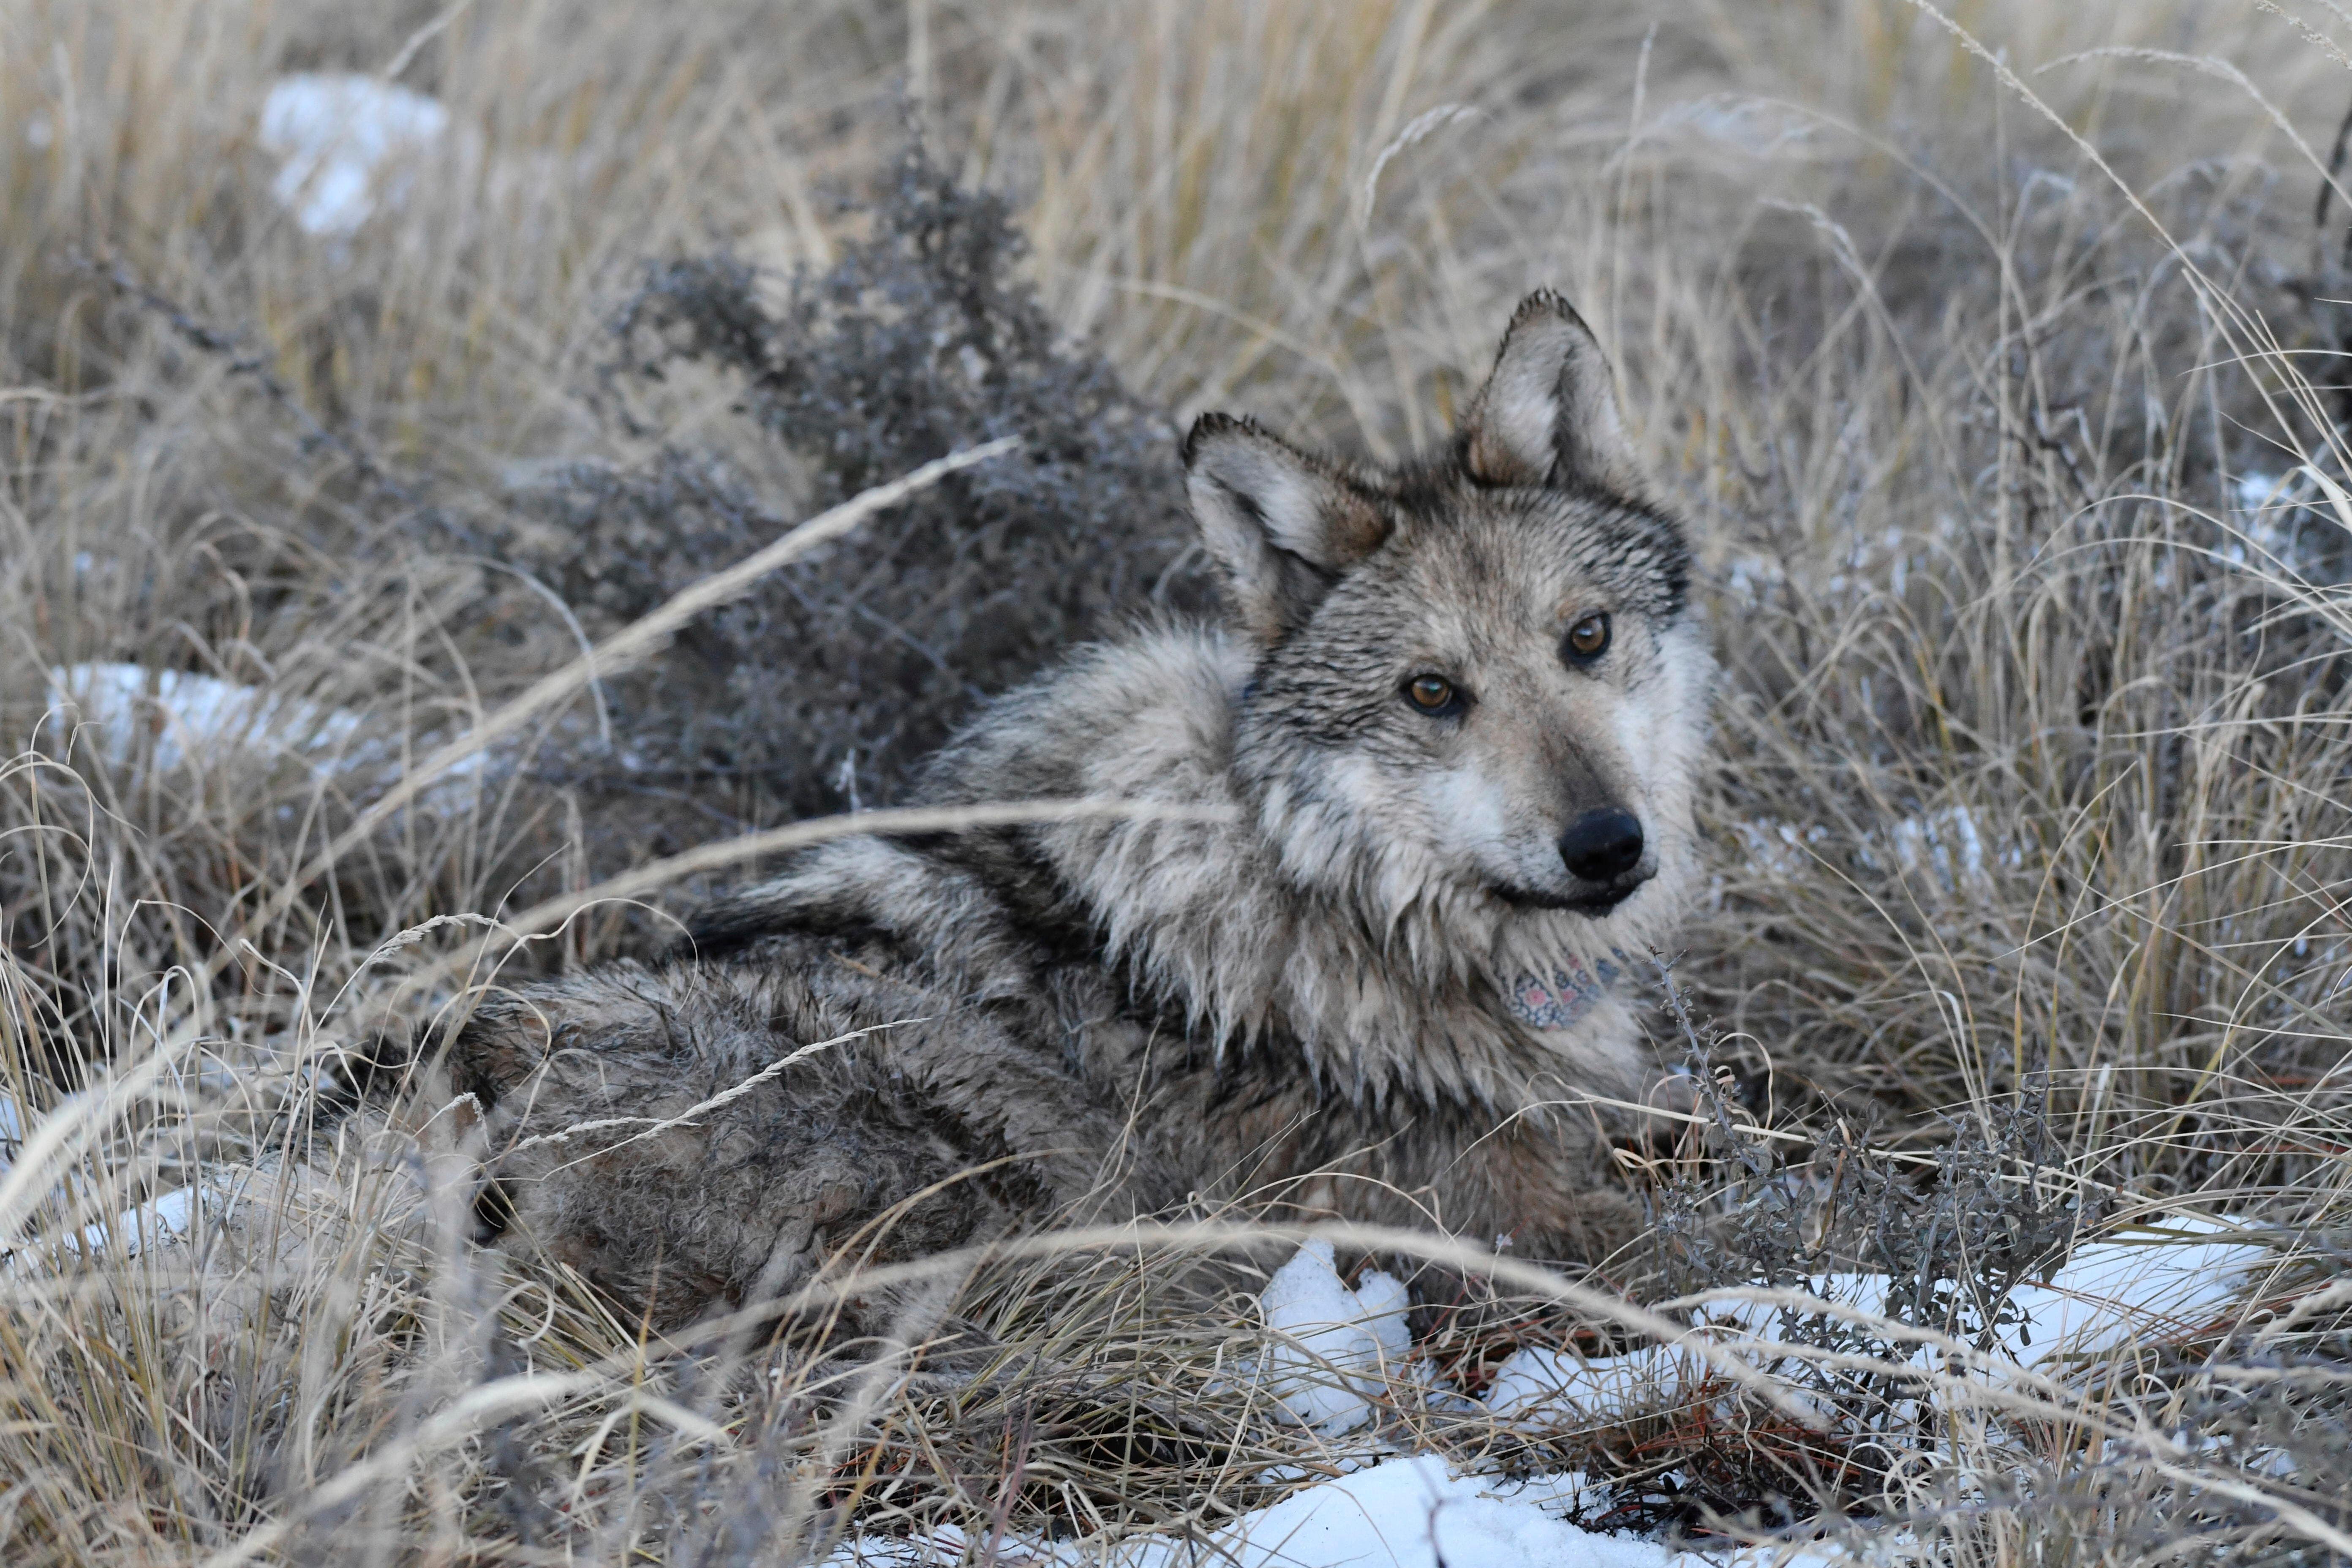 Endangered Mexican gray wolves still face threat despite growing population numbers